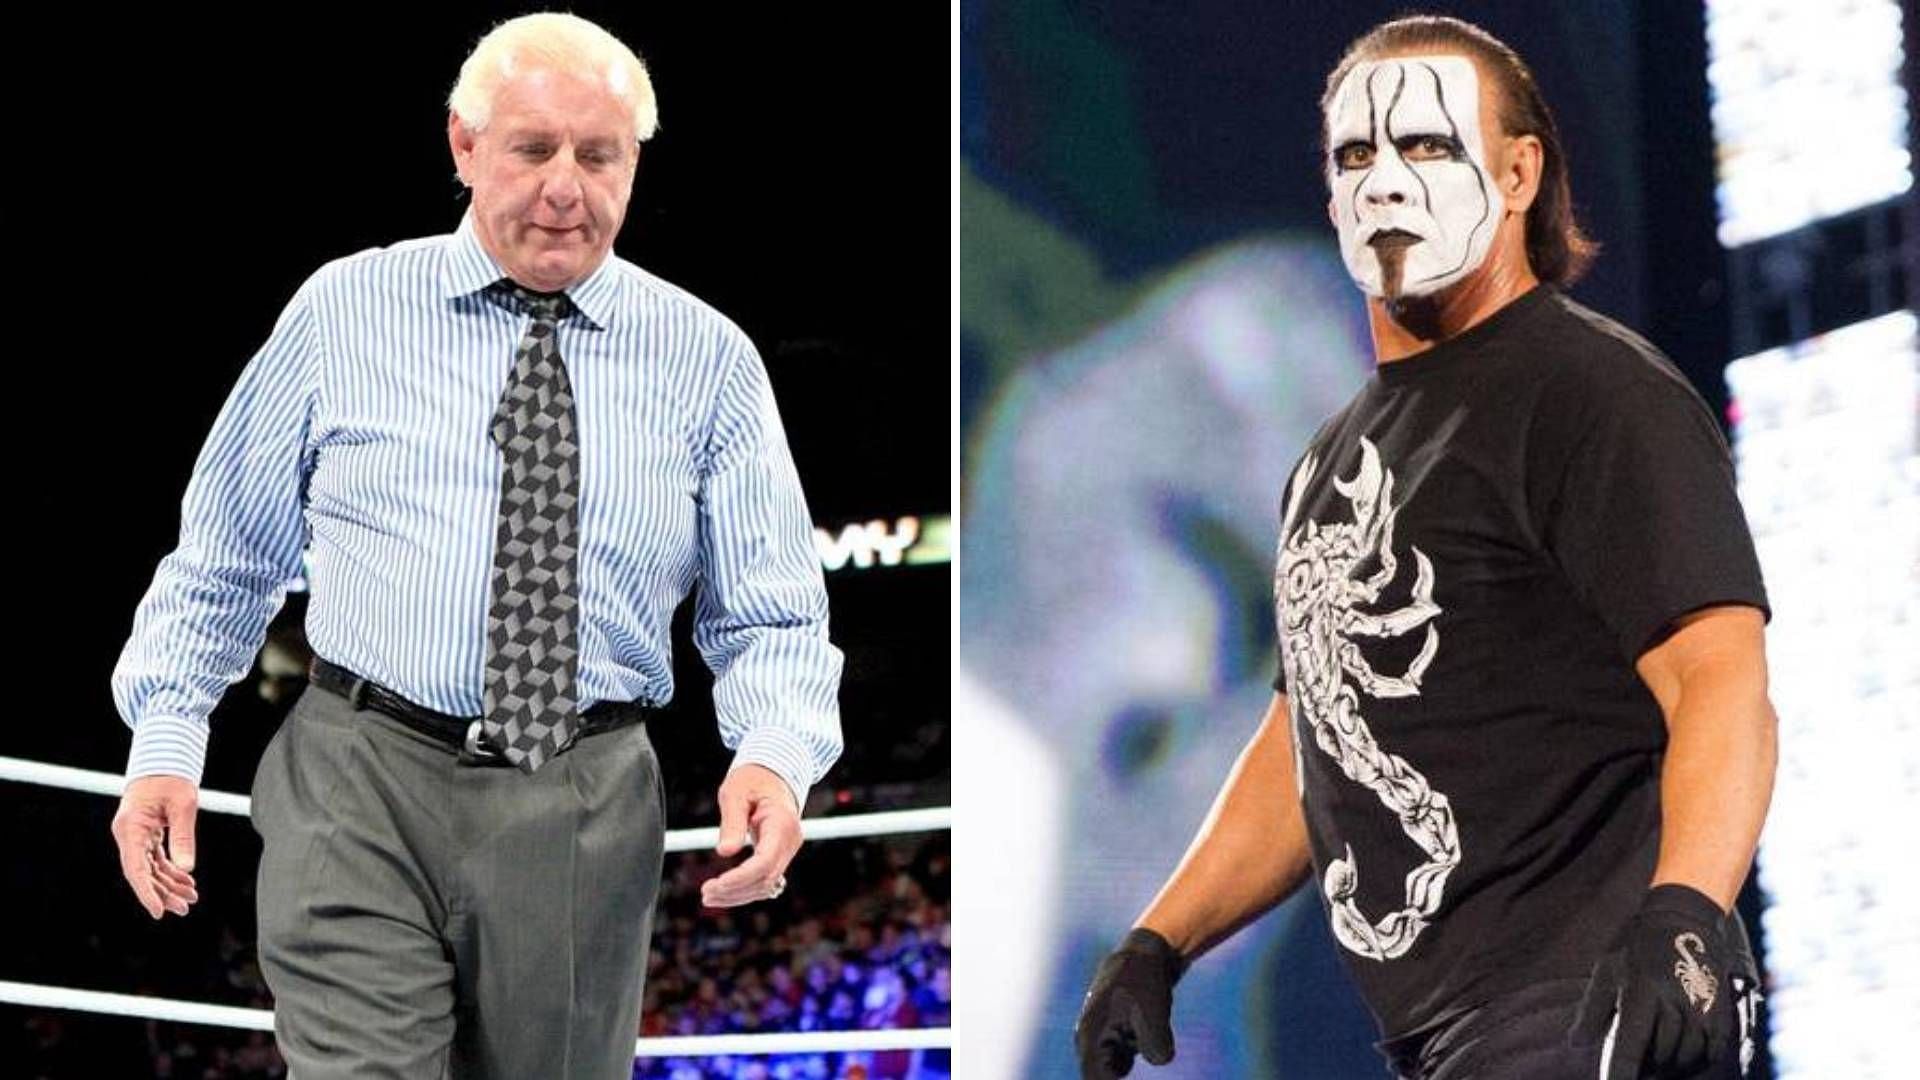 Ric Flair and Sting